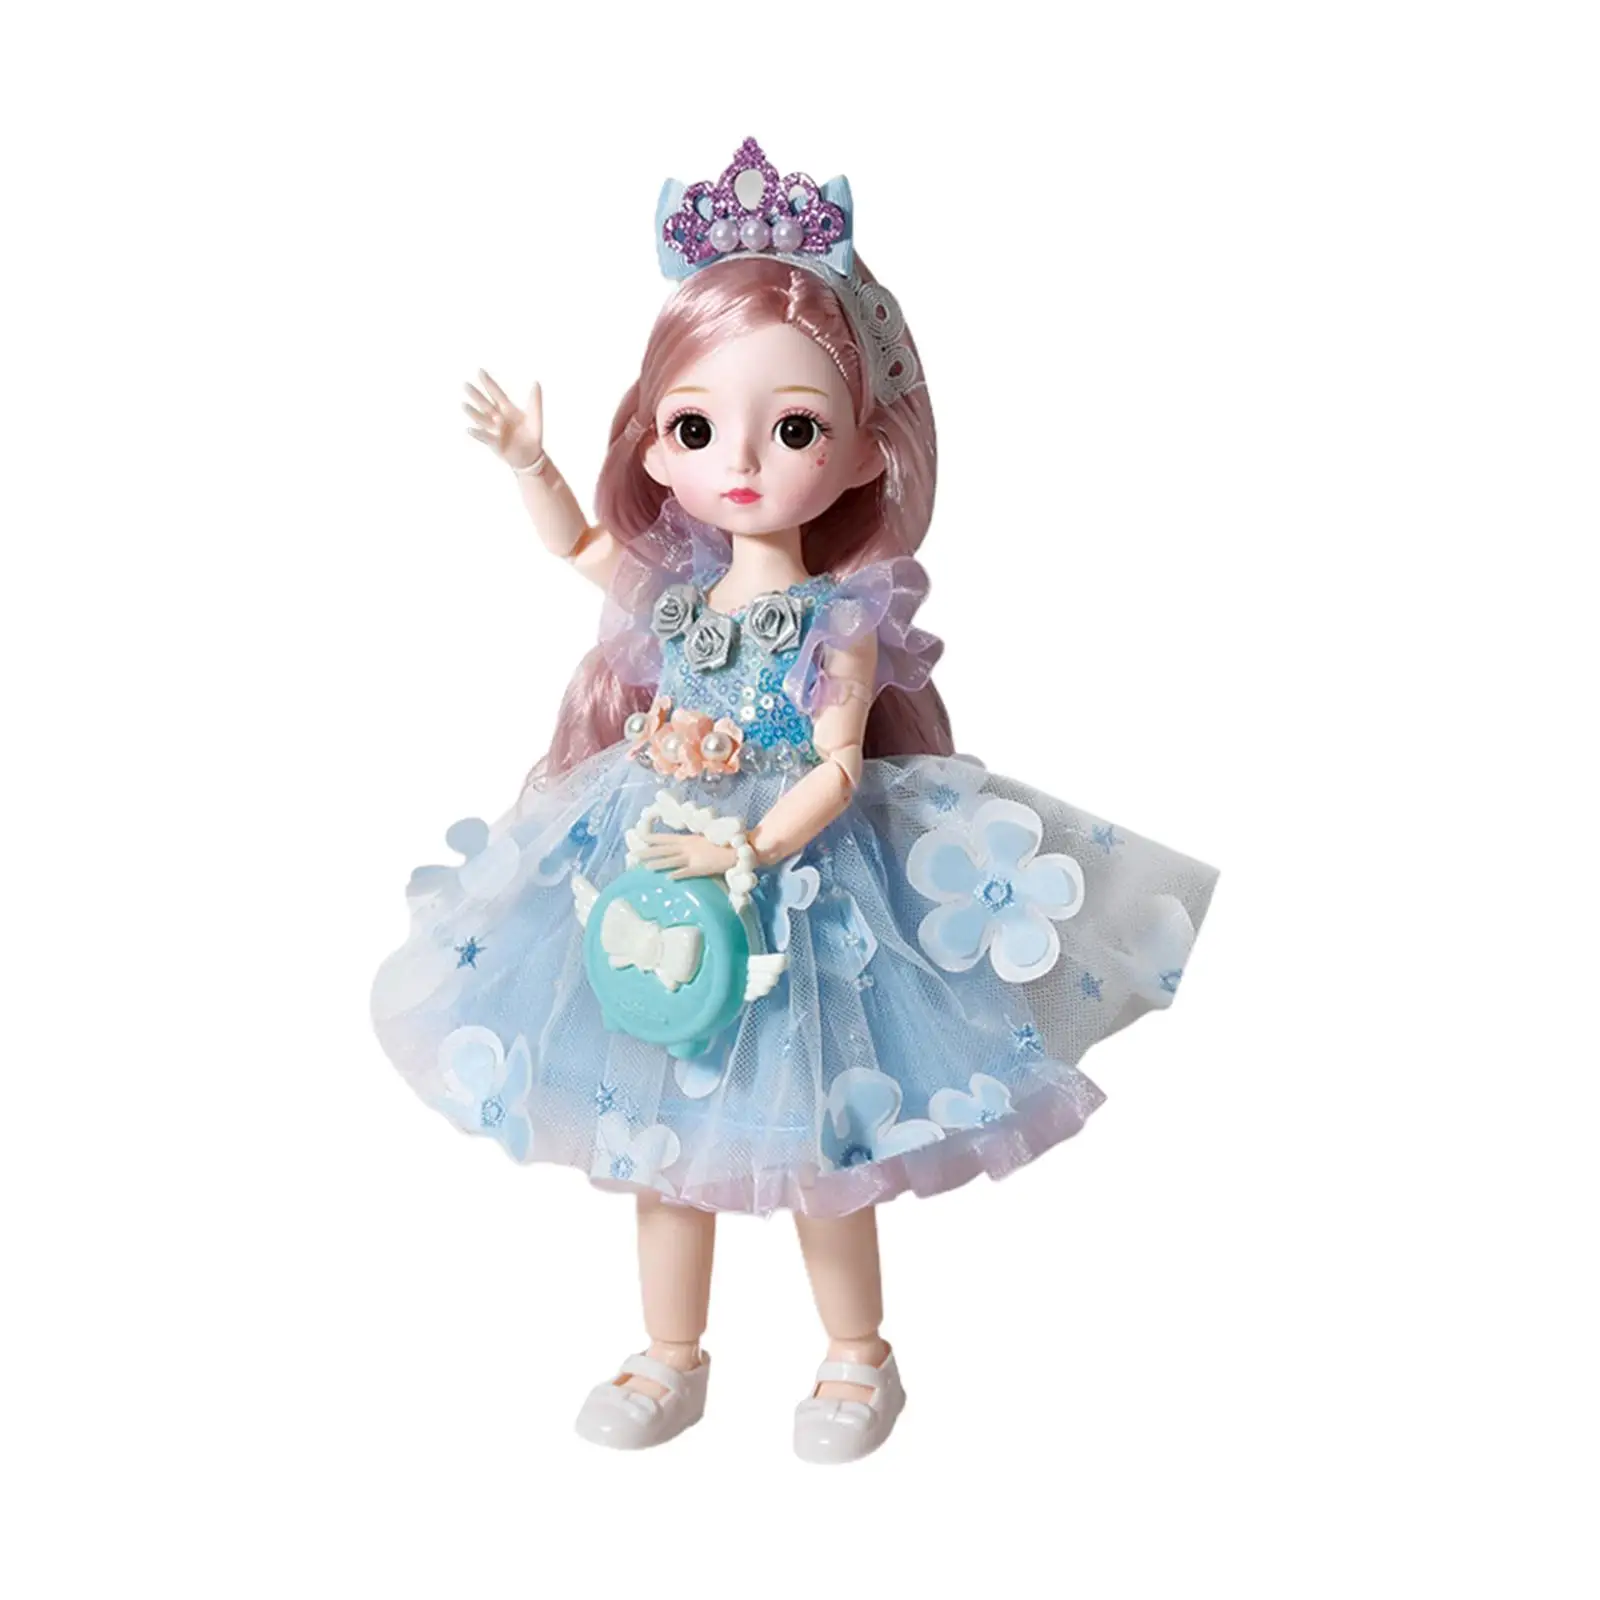 1/6 31cm Fashion Doll Moveable Joints Dress Up for Kids Toy Pretend Play